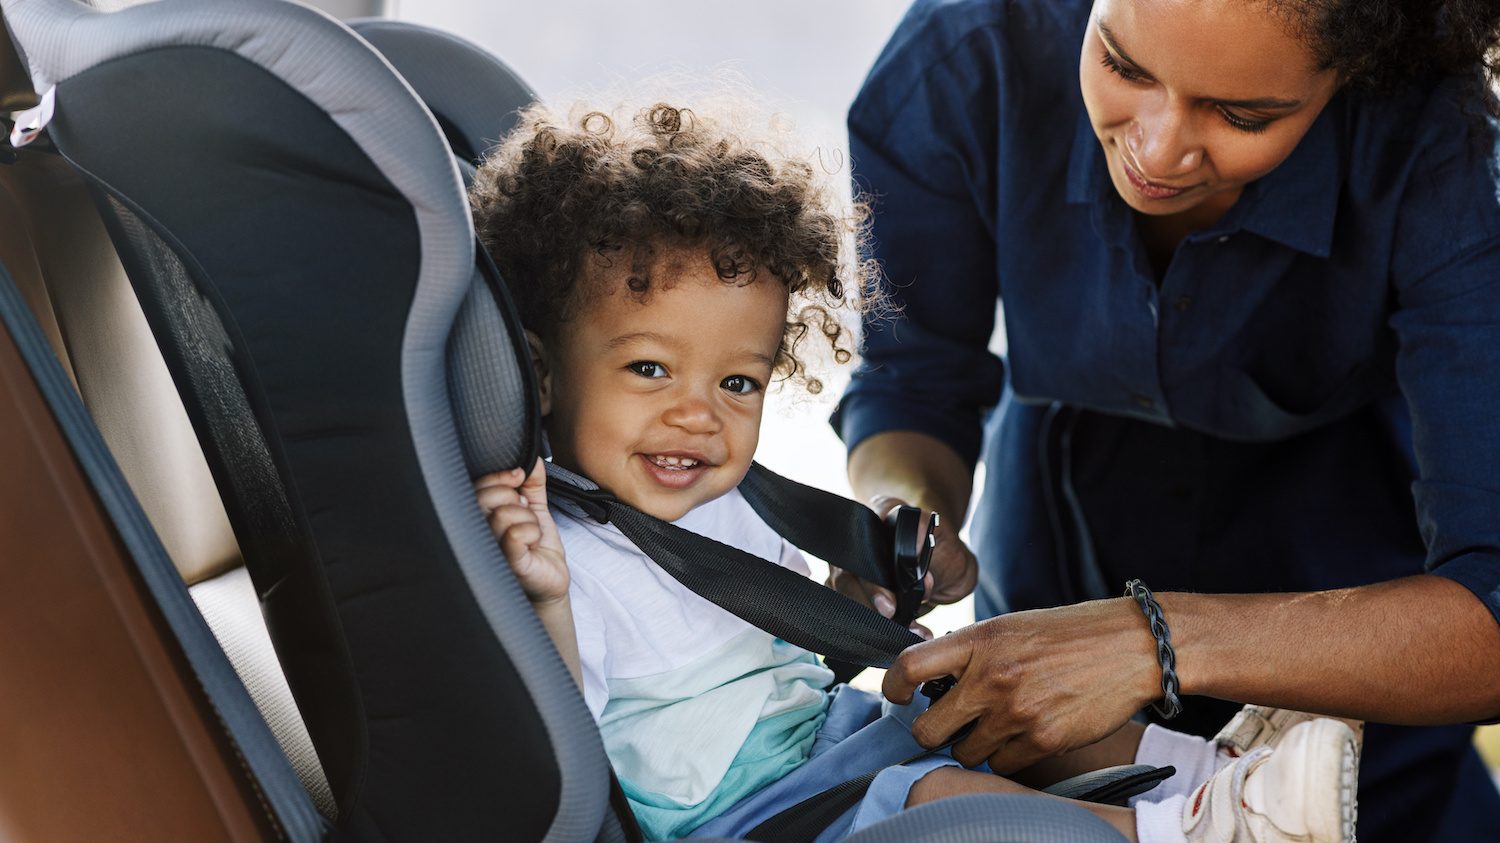 Free Car Seats Are Available To Some, Where Can I Get Free Baby Car Seats